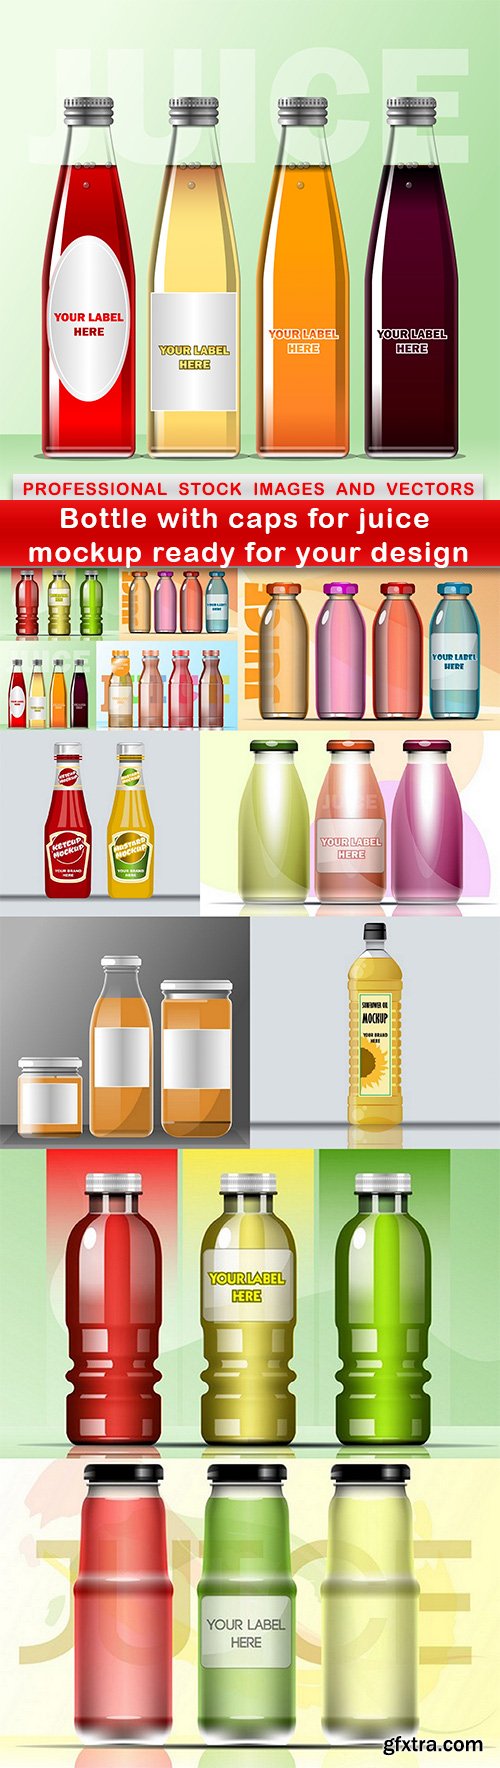 Bottle with caps for juice mockup ready for your design - 9 EPS